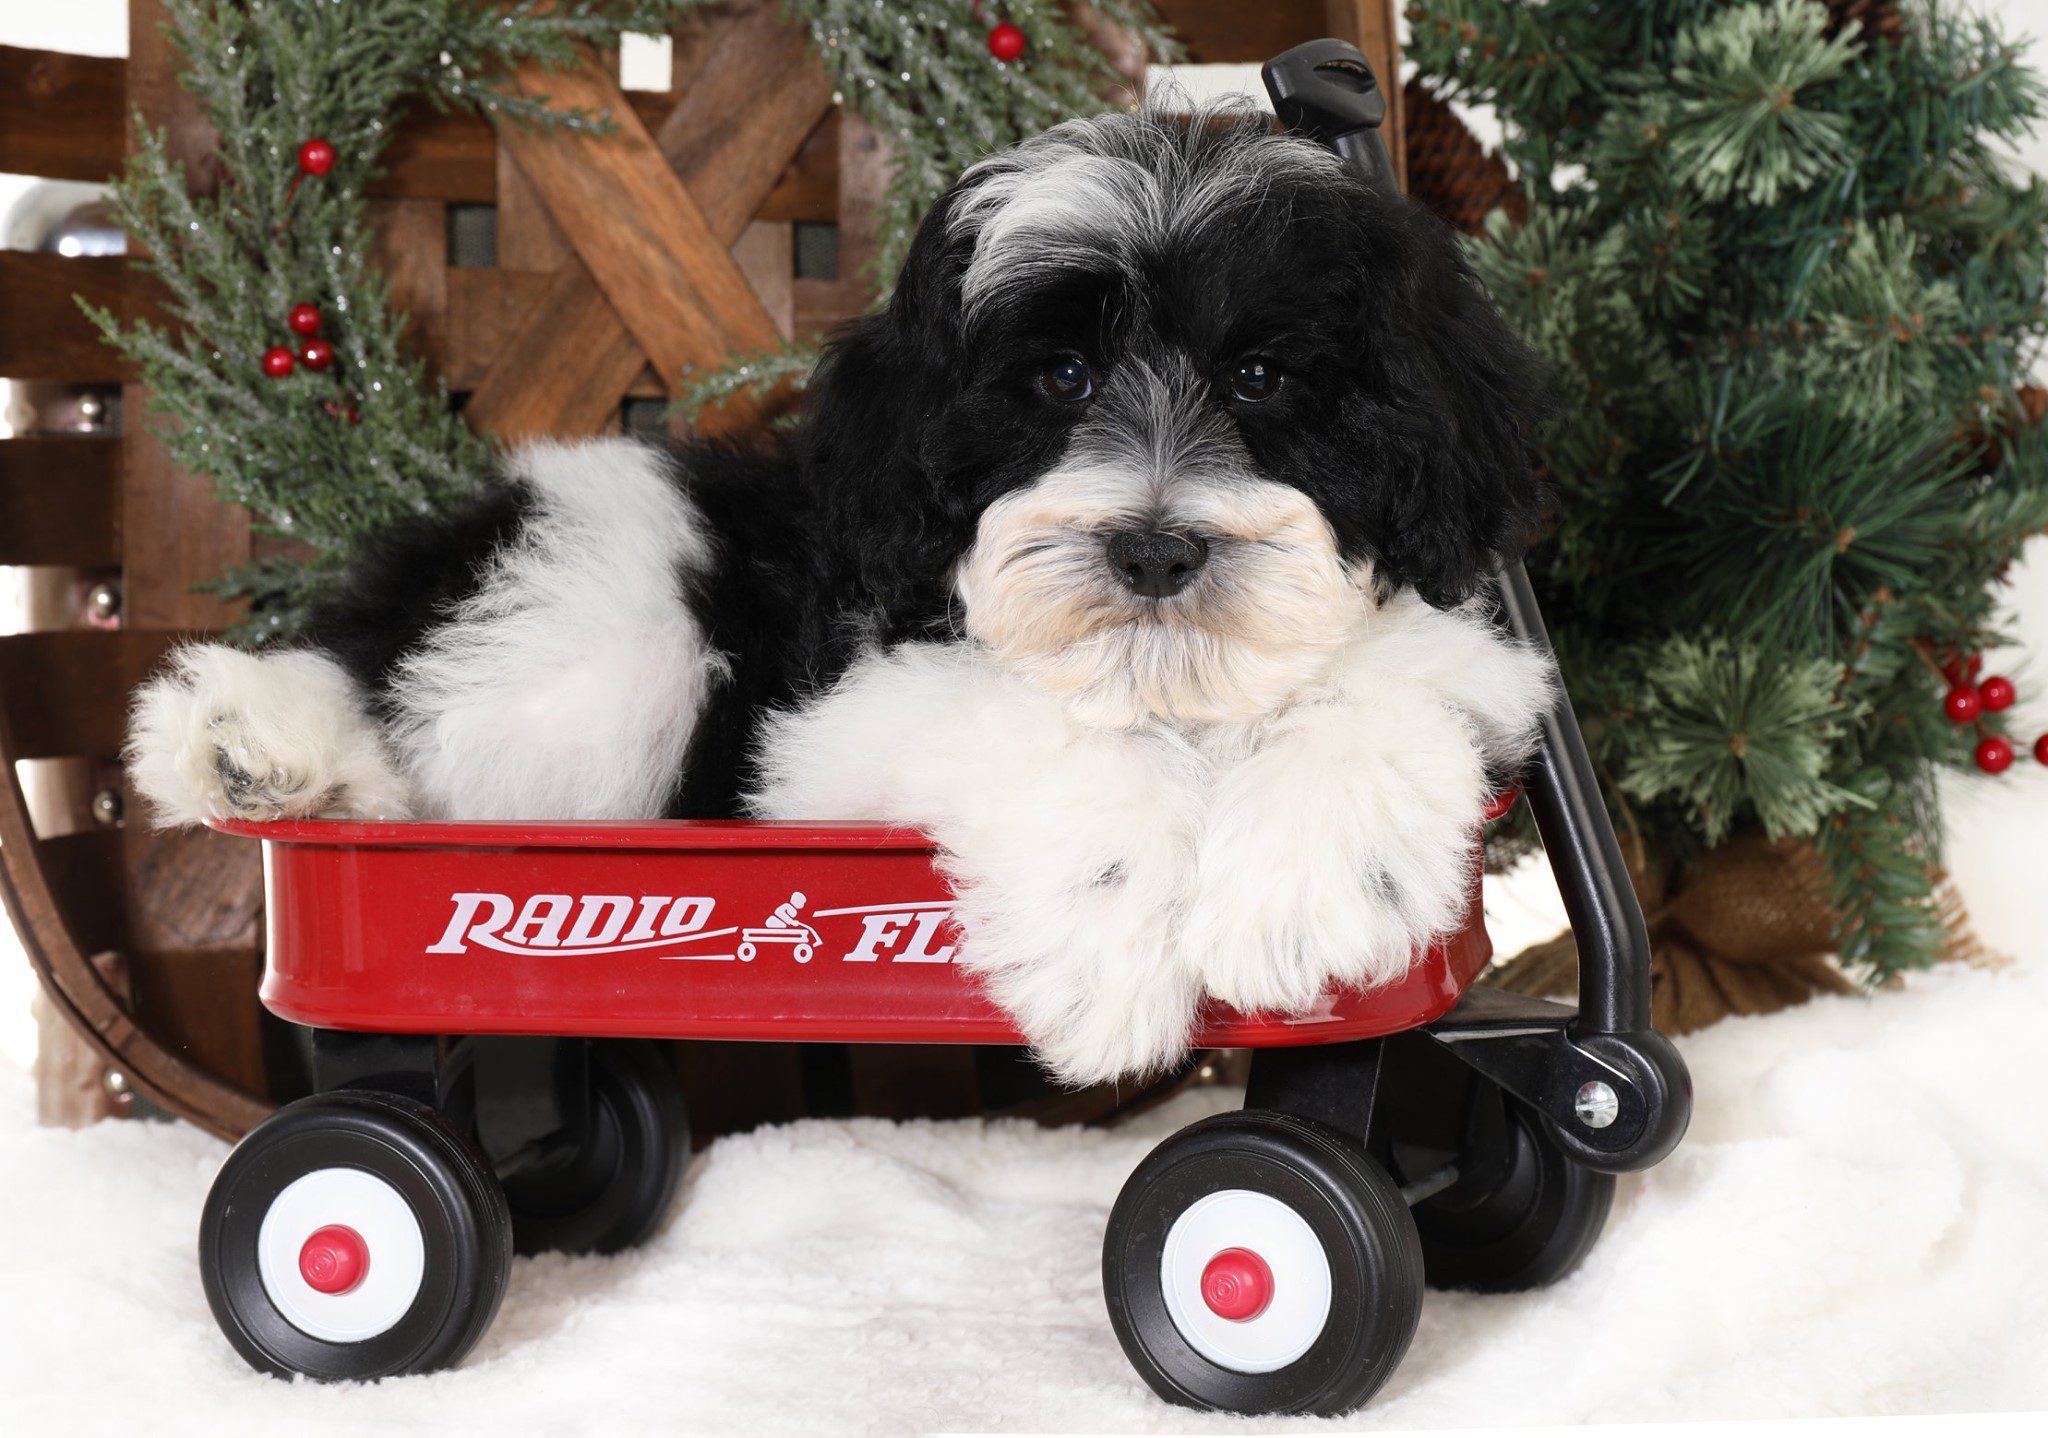 a black and white golden doodle in a radio flyer red wagon and a Christmas wreath